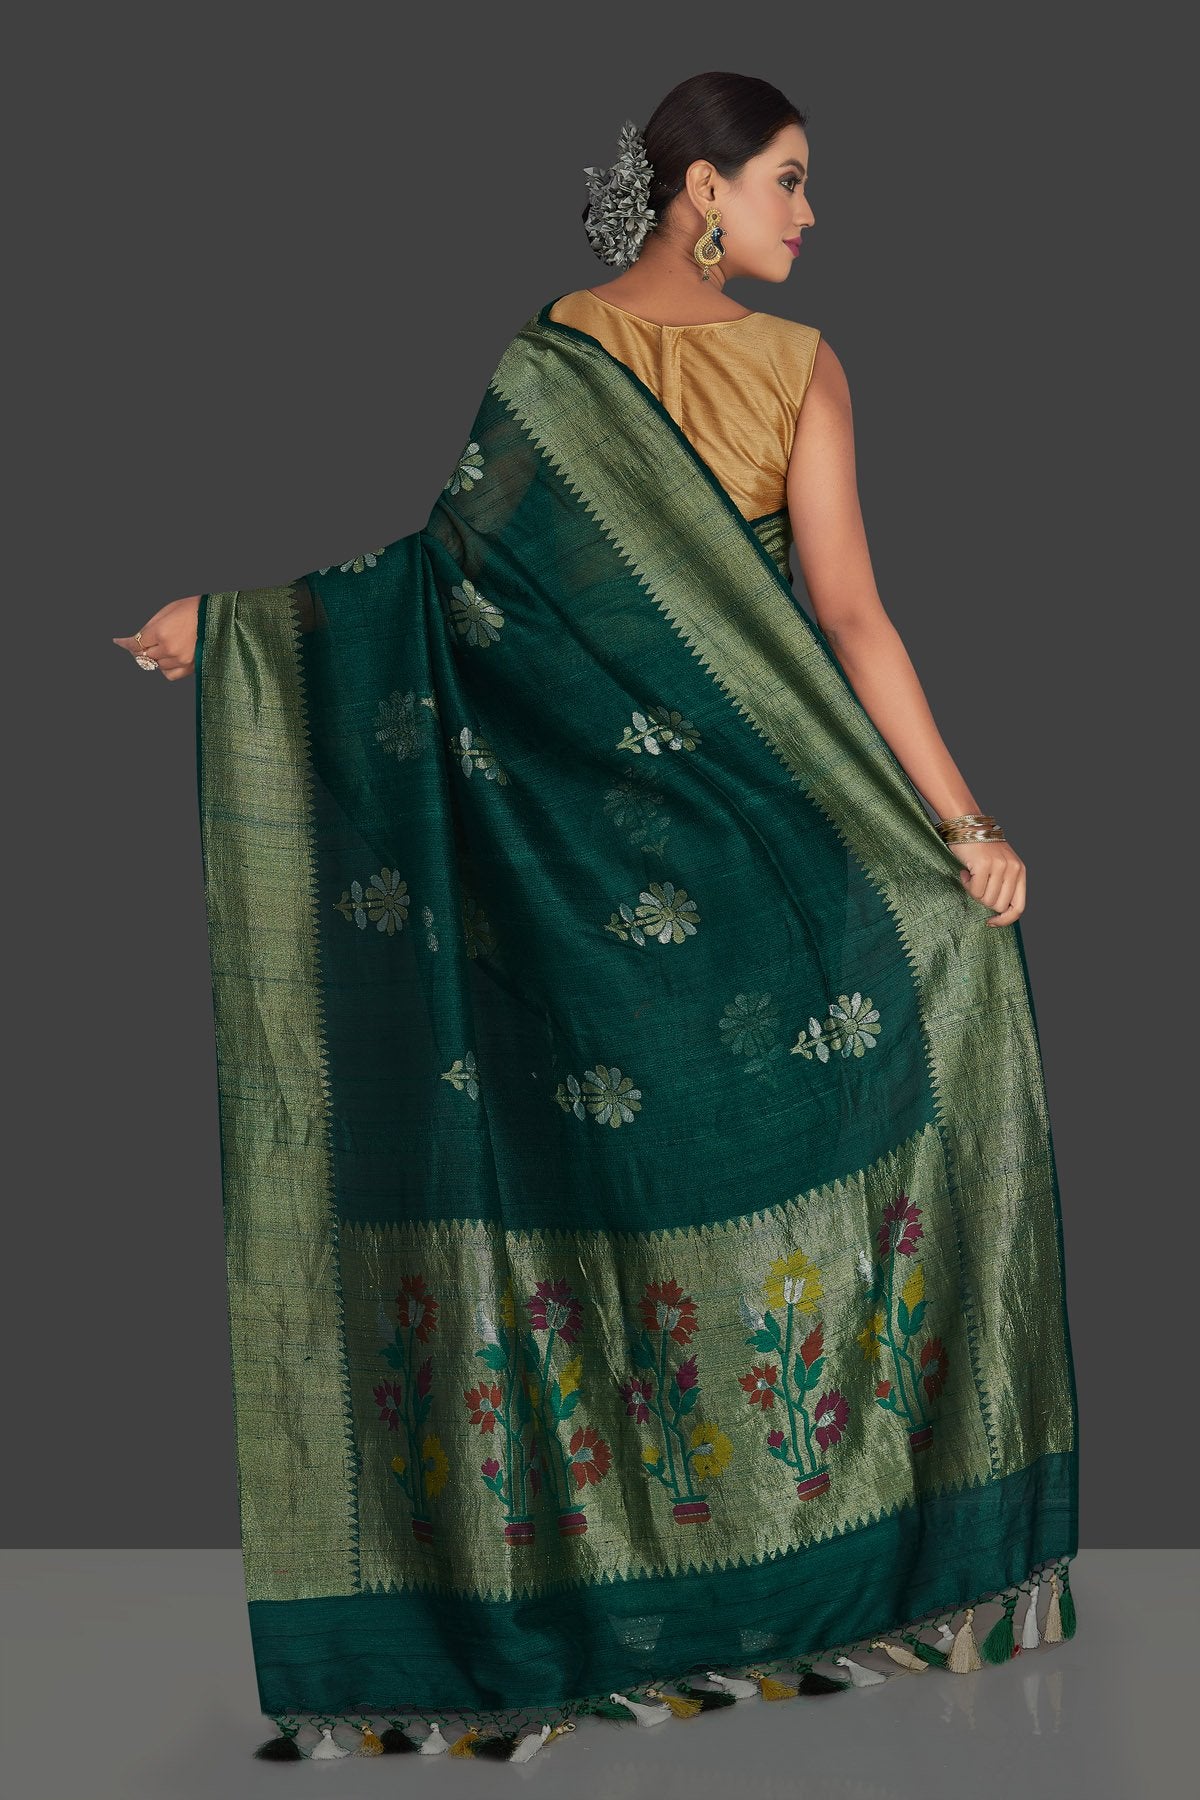 Buy elegant dark green tassar georgette Banarsi saree online in USA with flower buta. Radiate elegance with georgette sarees, Banarasi sarees, handwoven sarees from Pure Elegance Indian fashion boutique in USA. We bring a especially curated collection of ethnic sarees for Indian women in USA under one roof!-back